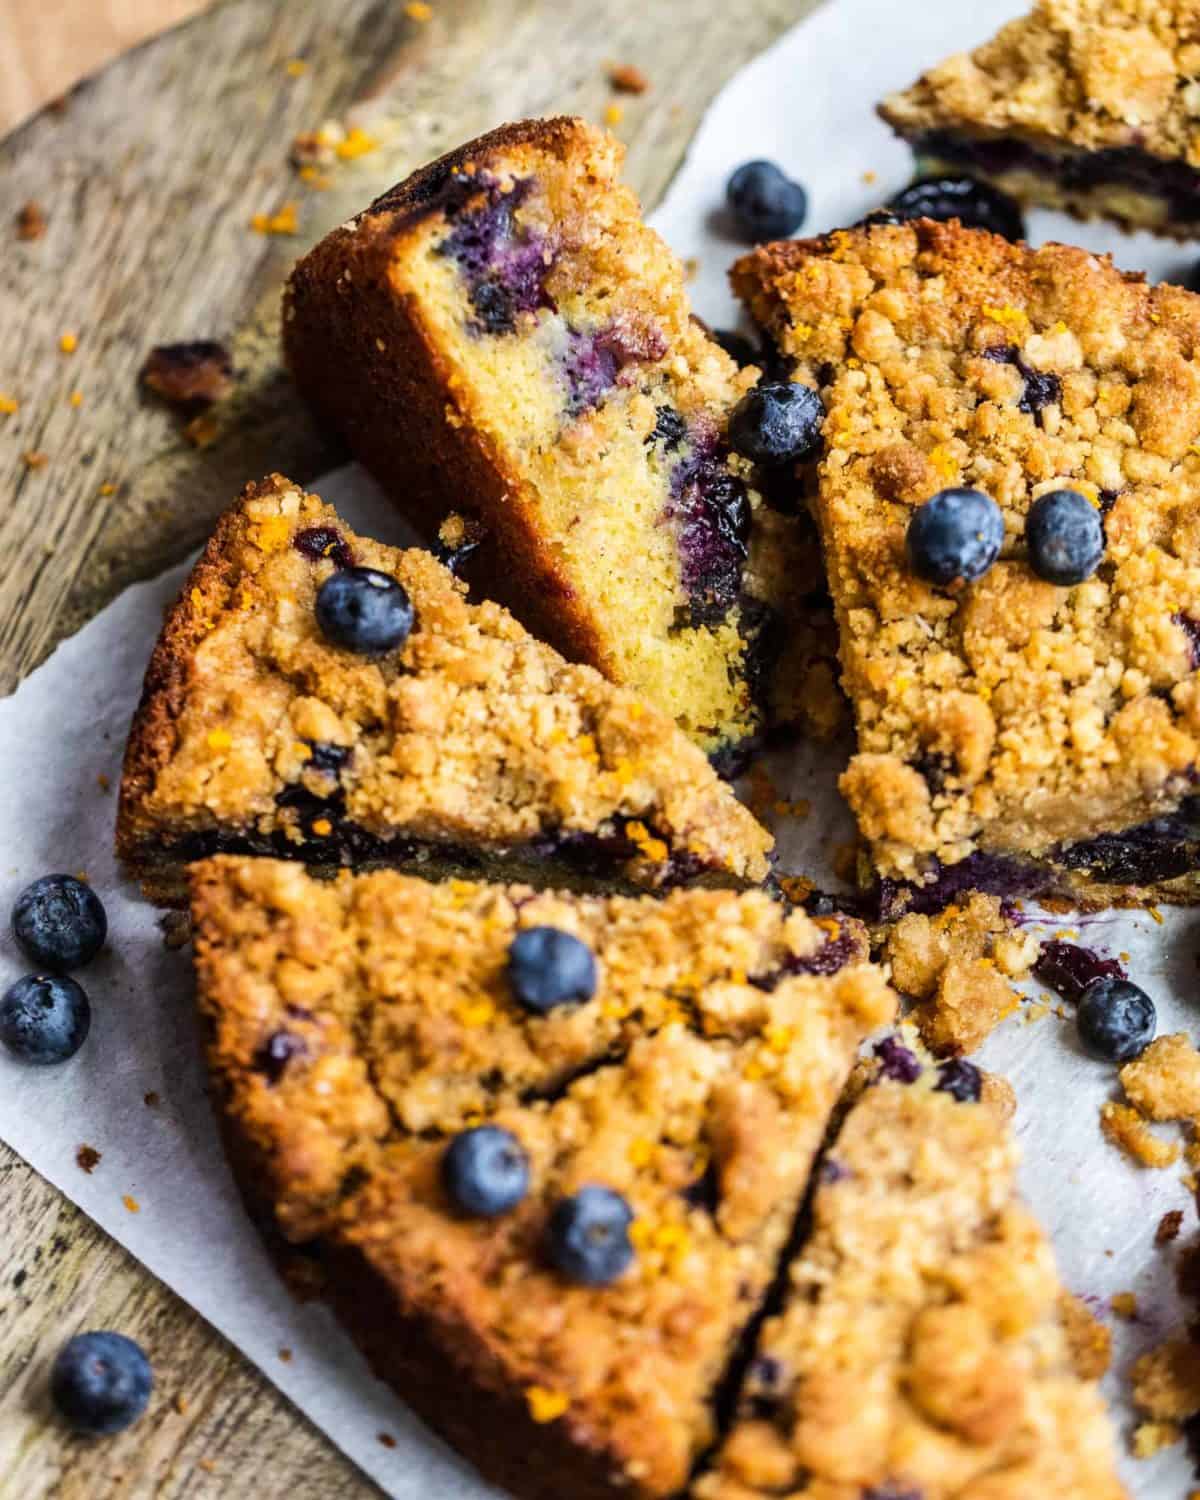 Blueberry Prune Buckle with Ginger Streusel